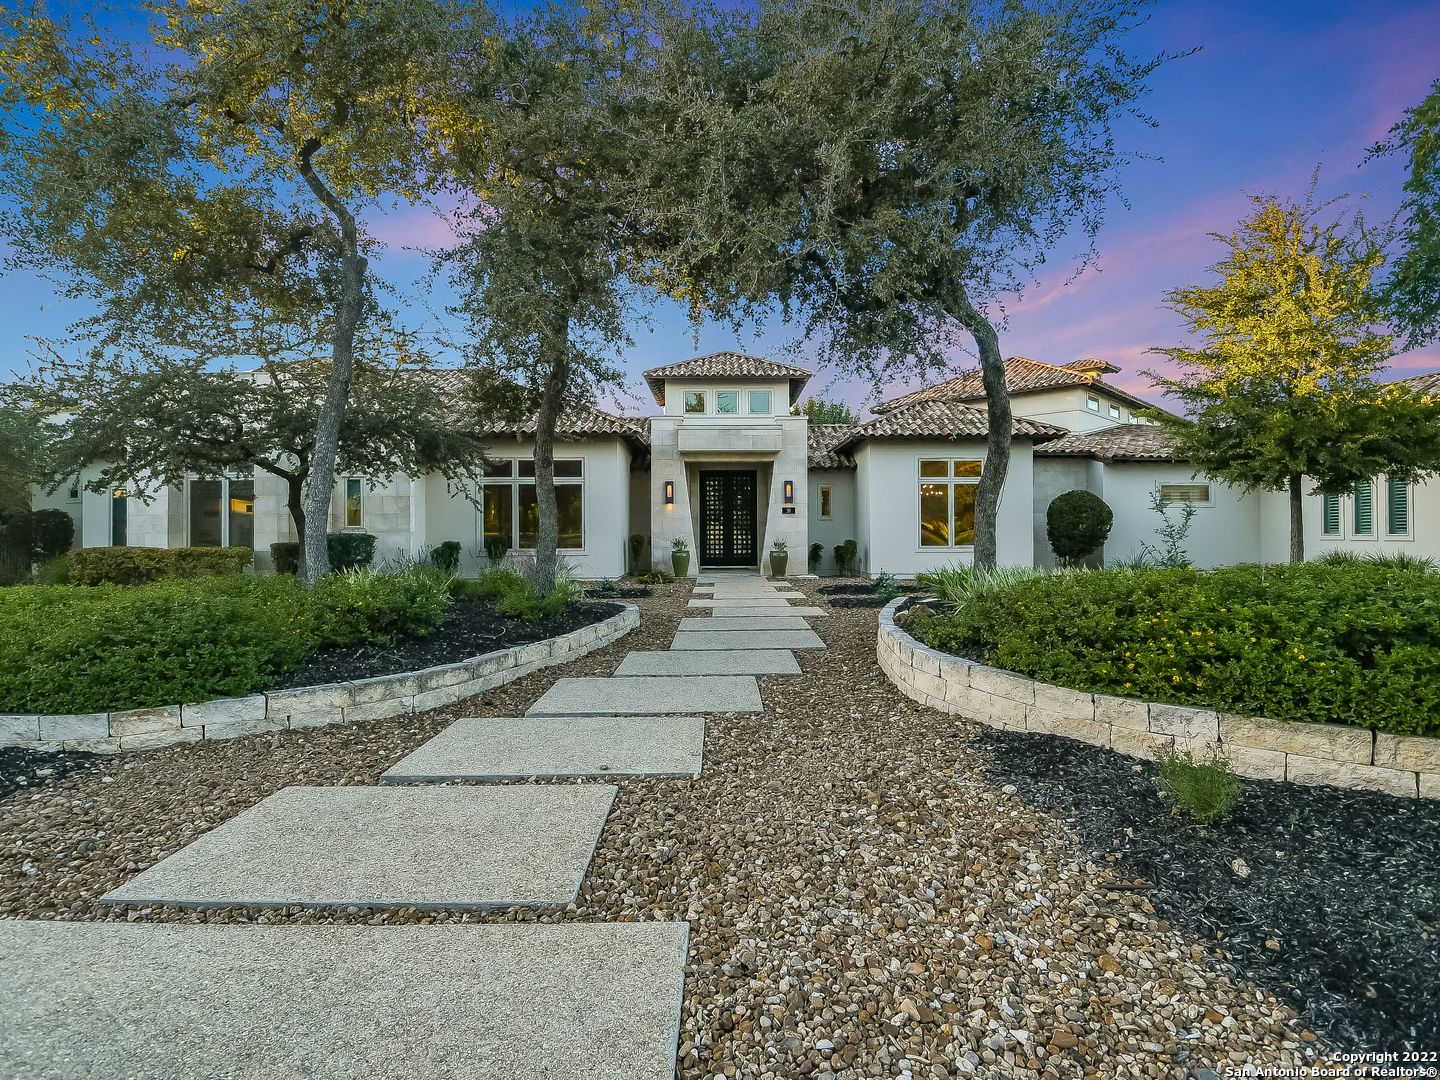 This award winning single story masterpiece is positioned perfectly on the 1.19 acre lot to take in the stunning hill country views while maintaining privacy. The over 6,000 sqft home features design elements that showcase the open floor plan with walls of sliding glass doors that seamlessly integrates indoor and outdoor living. The chef's kitchen features top of the line Thermador appliances, an expansive custom island that flows into the living room with soaring barreled ceilings, a stone wrapped fireplace and large breakfast room. The oversized master suite boasts a spa-like bath with a double marble shower, stand alone soaking tub, multiple expansive walk-in closets and an exercise room with outdoor access. Each of the 4 additional bedrooms feature an on-suite bathroom and walk-in closet. Additional features include the spacious home office overlooks the pool, coved ceiling dining room, 200 bottle wine rack and the generously sized game room that boasts a wet bar creating an entertainers dream. The outdoor covered patio is outfitted with an outdoor kitchen and custom automatic screens that protects the dining experience from bugs with the press of a button. The resort-like grounds feature an infinity Keith Zars pool & spa, fir pit, sports court for pickle ball or basketball, and a pollinator garden. Gorgeously designed by Gustavo Arredondo and built by Burdick Custom Homes in 2016, this property must be experienced in person to be able to take in all it has to offer.